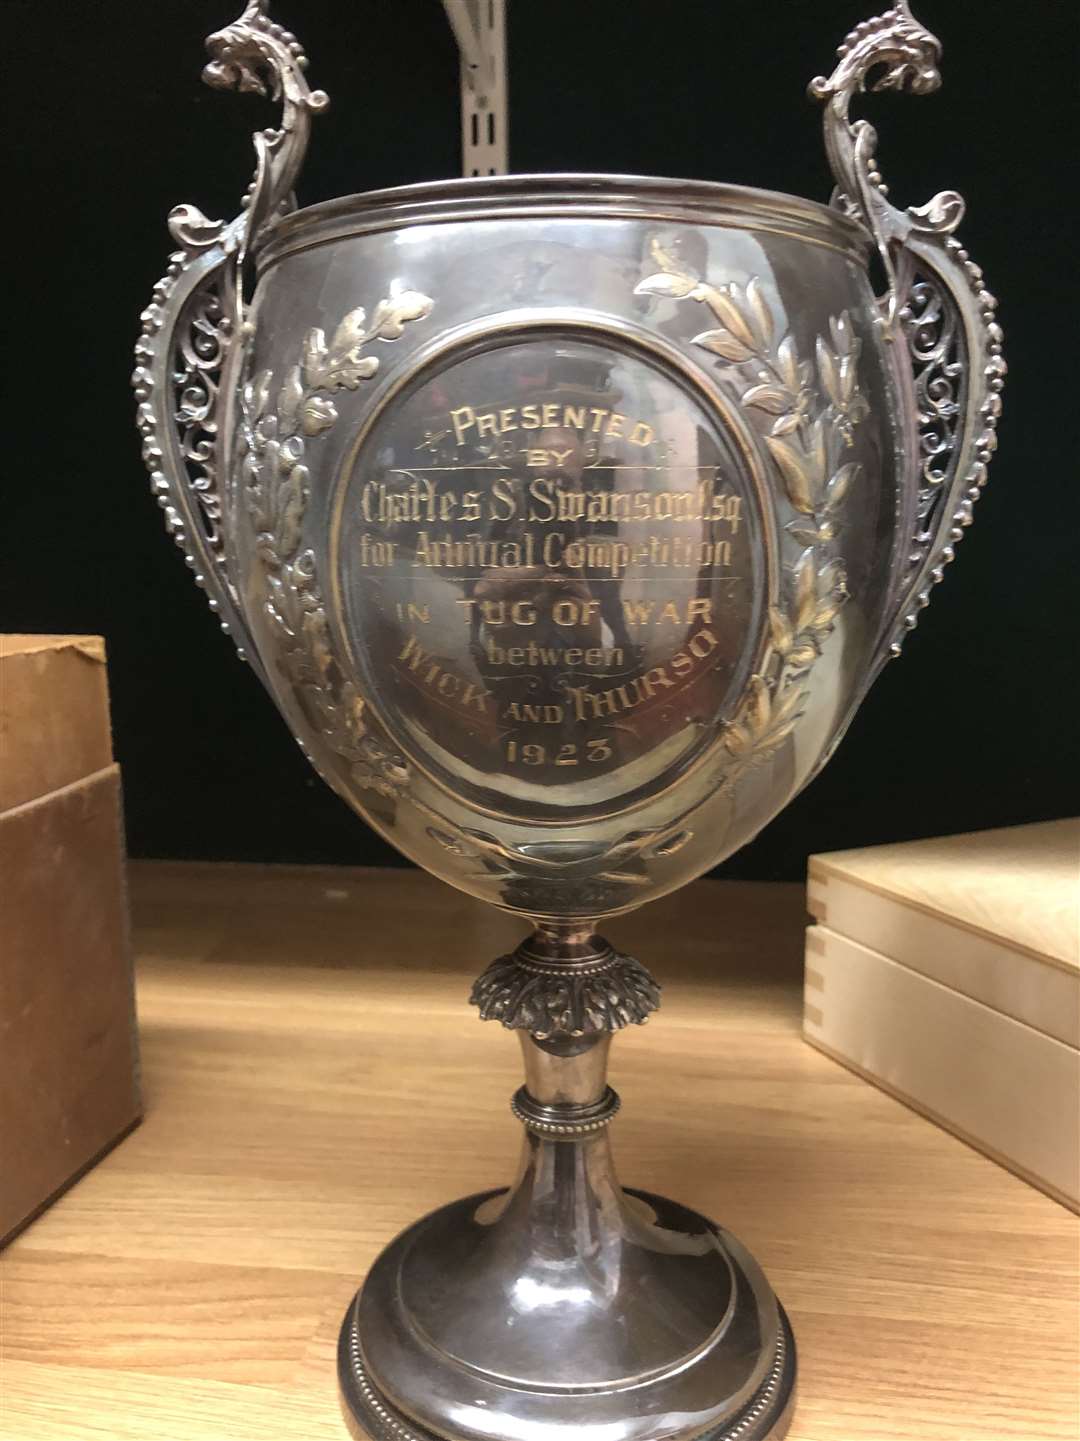 The Charles Swanson Cup was awarded for a tug-of-war competition between Thurso and Wick.